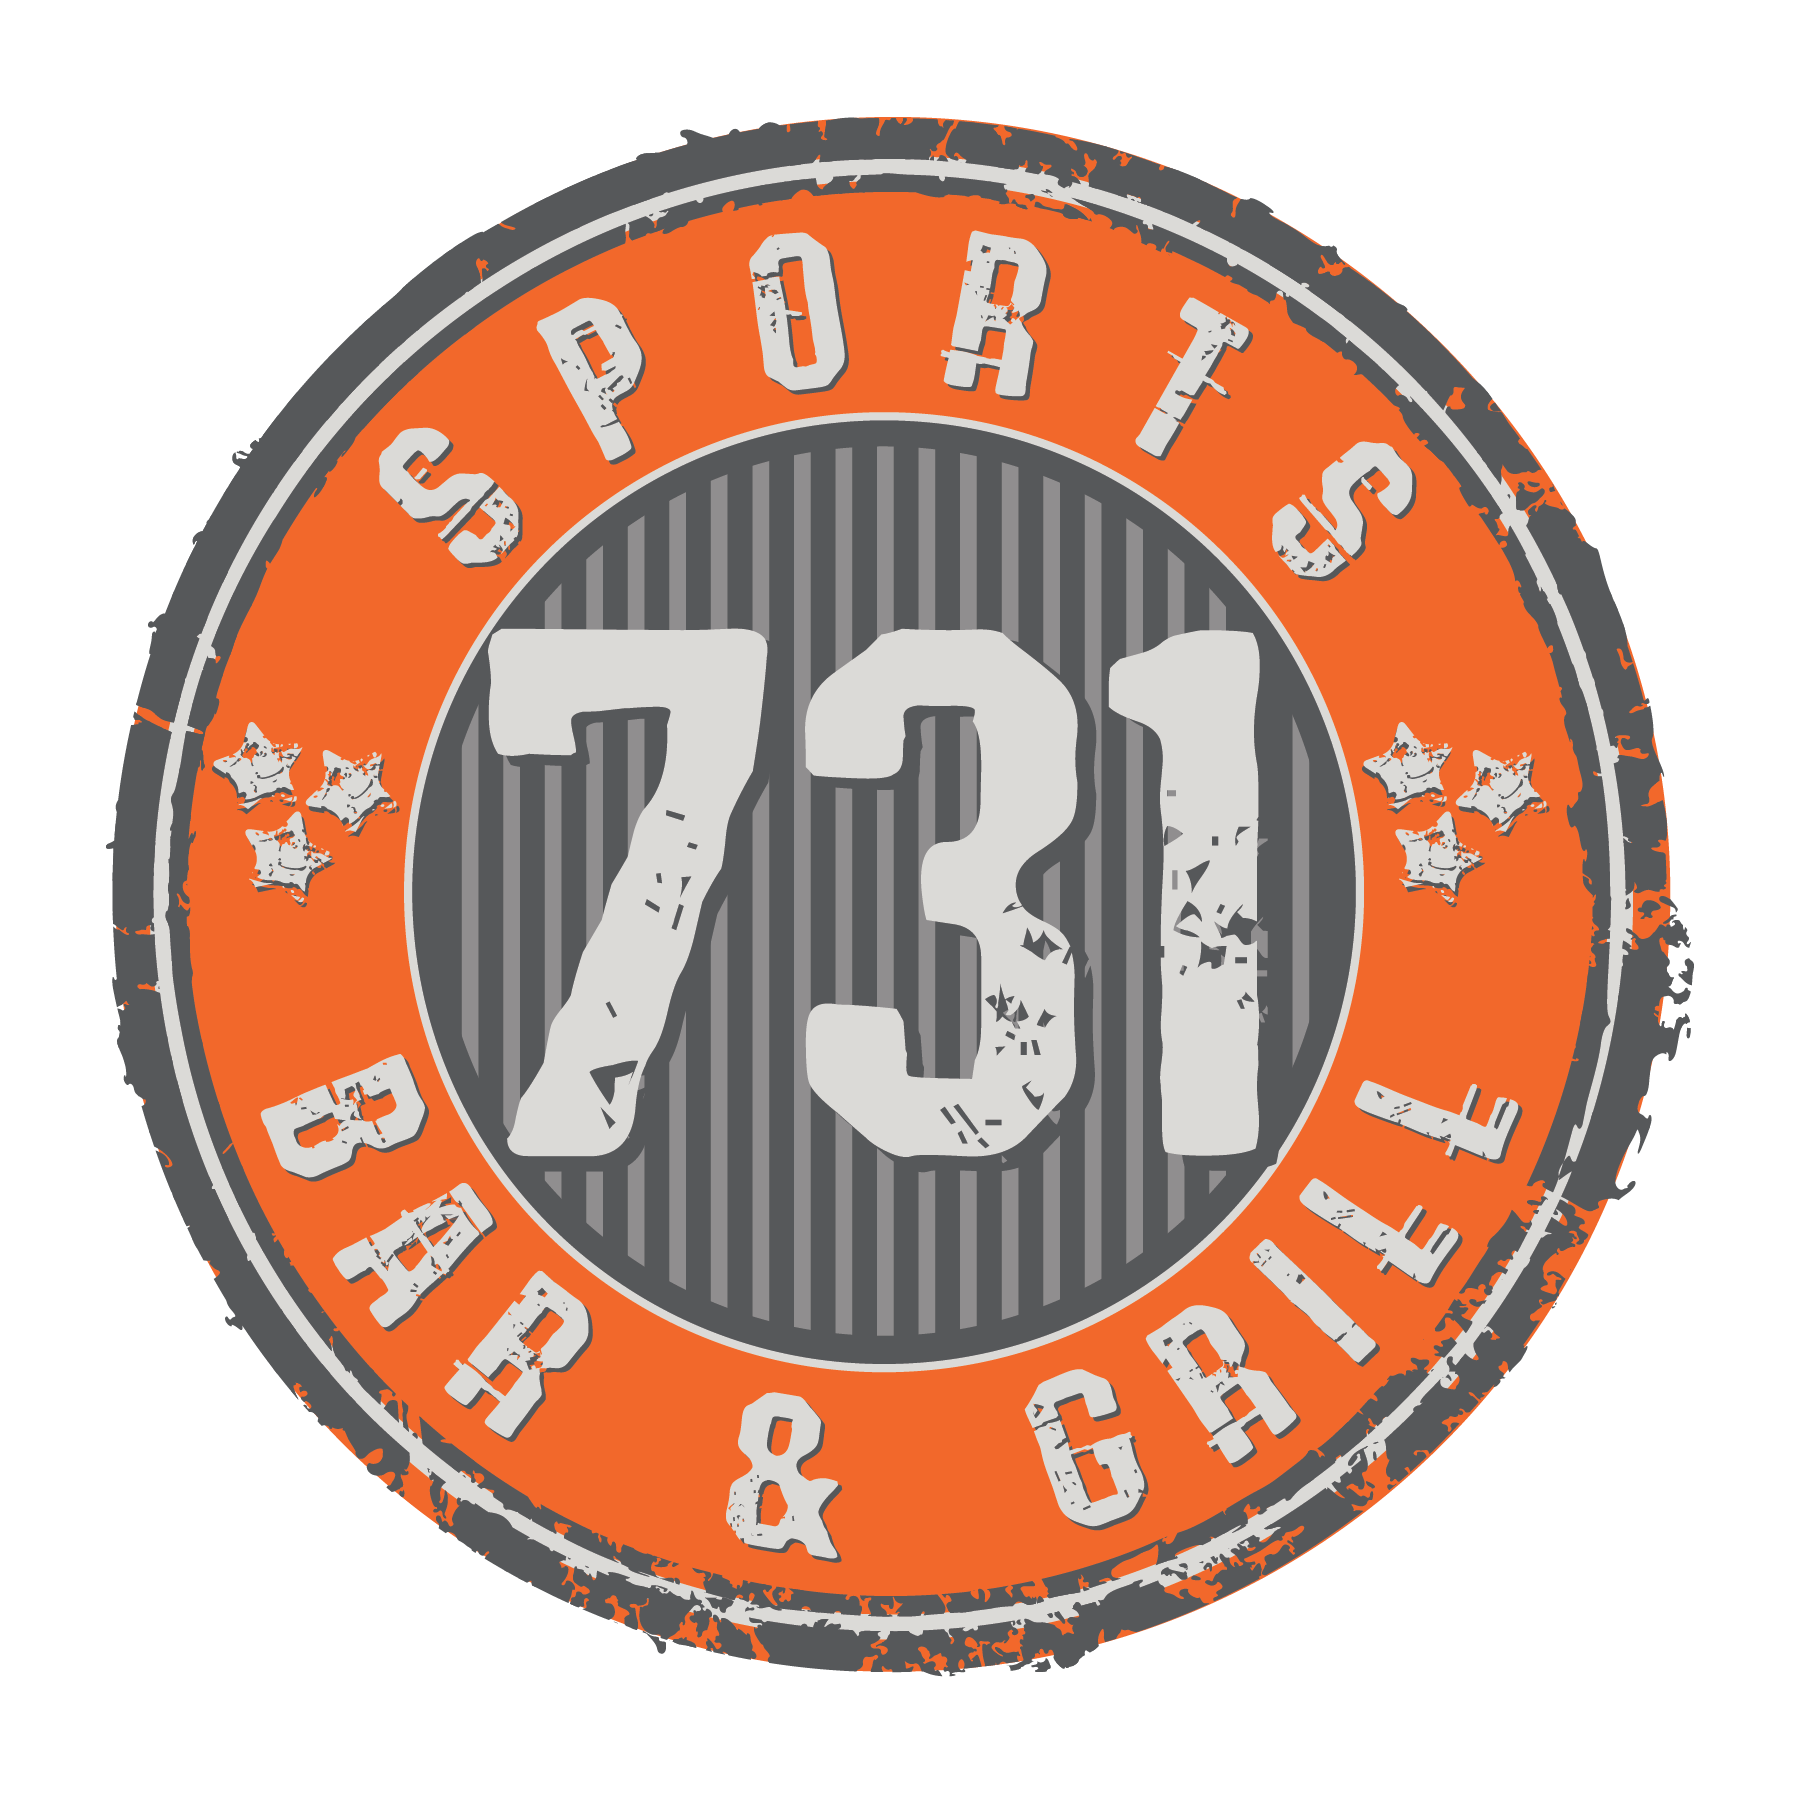 731 Sports Bar and Grill – Enjoy great food, drink and sports!